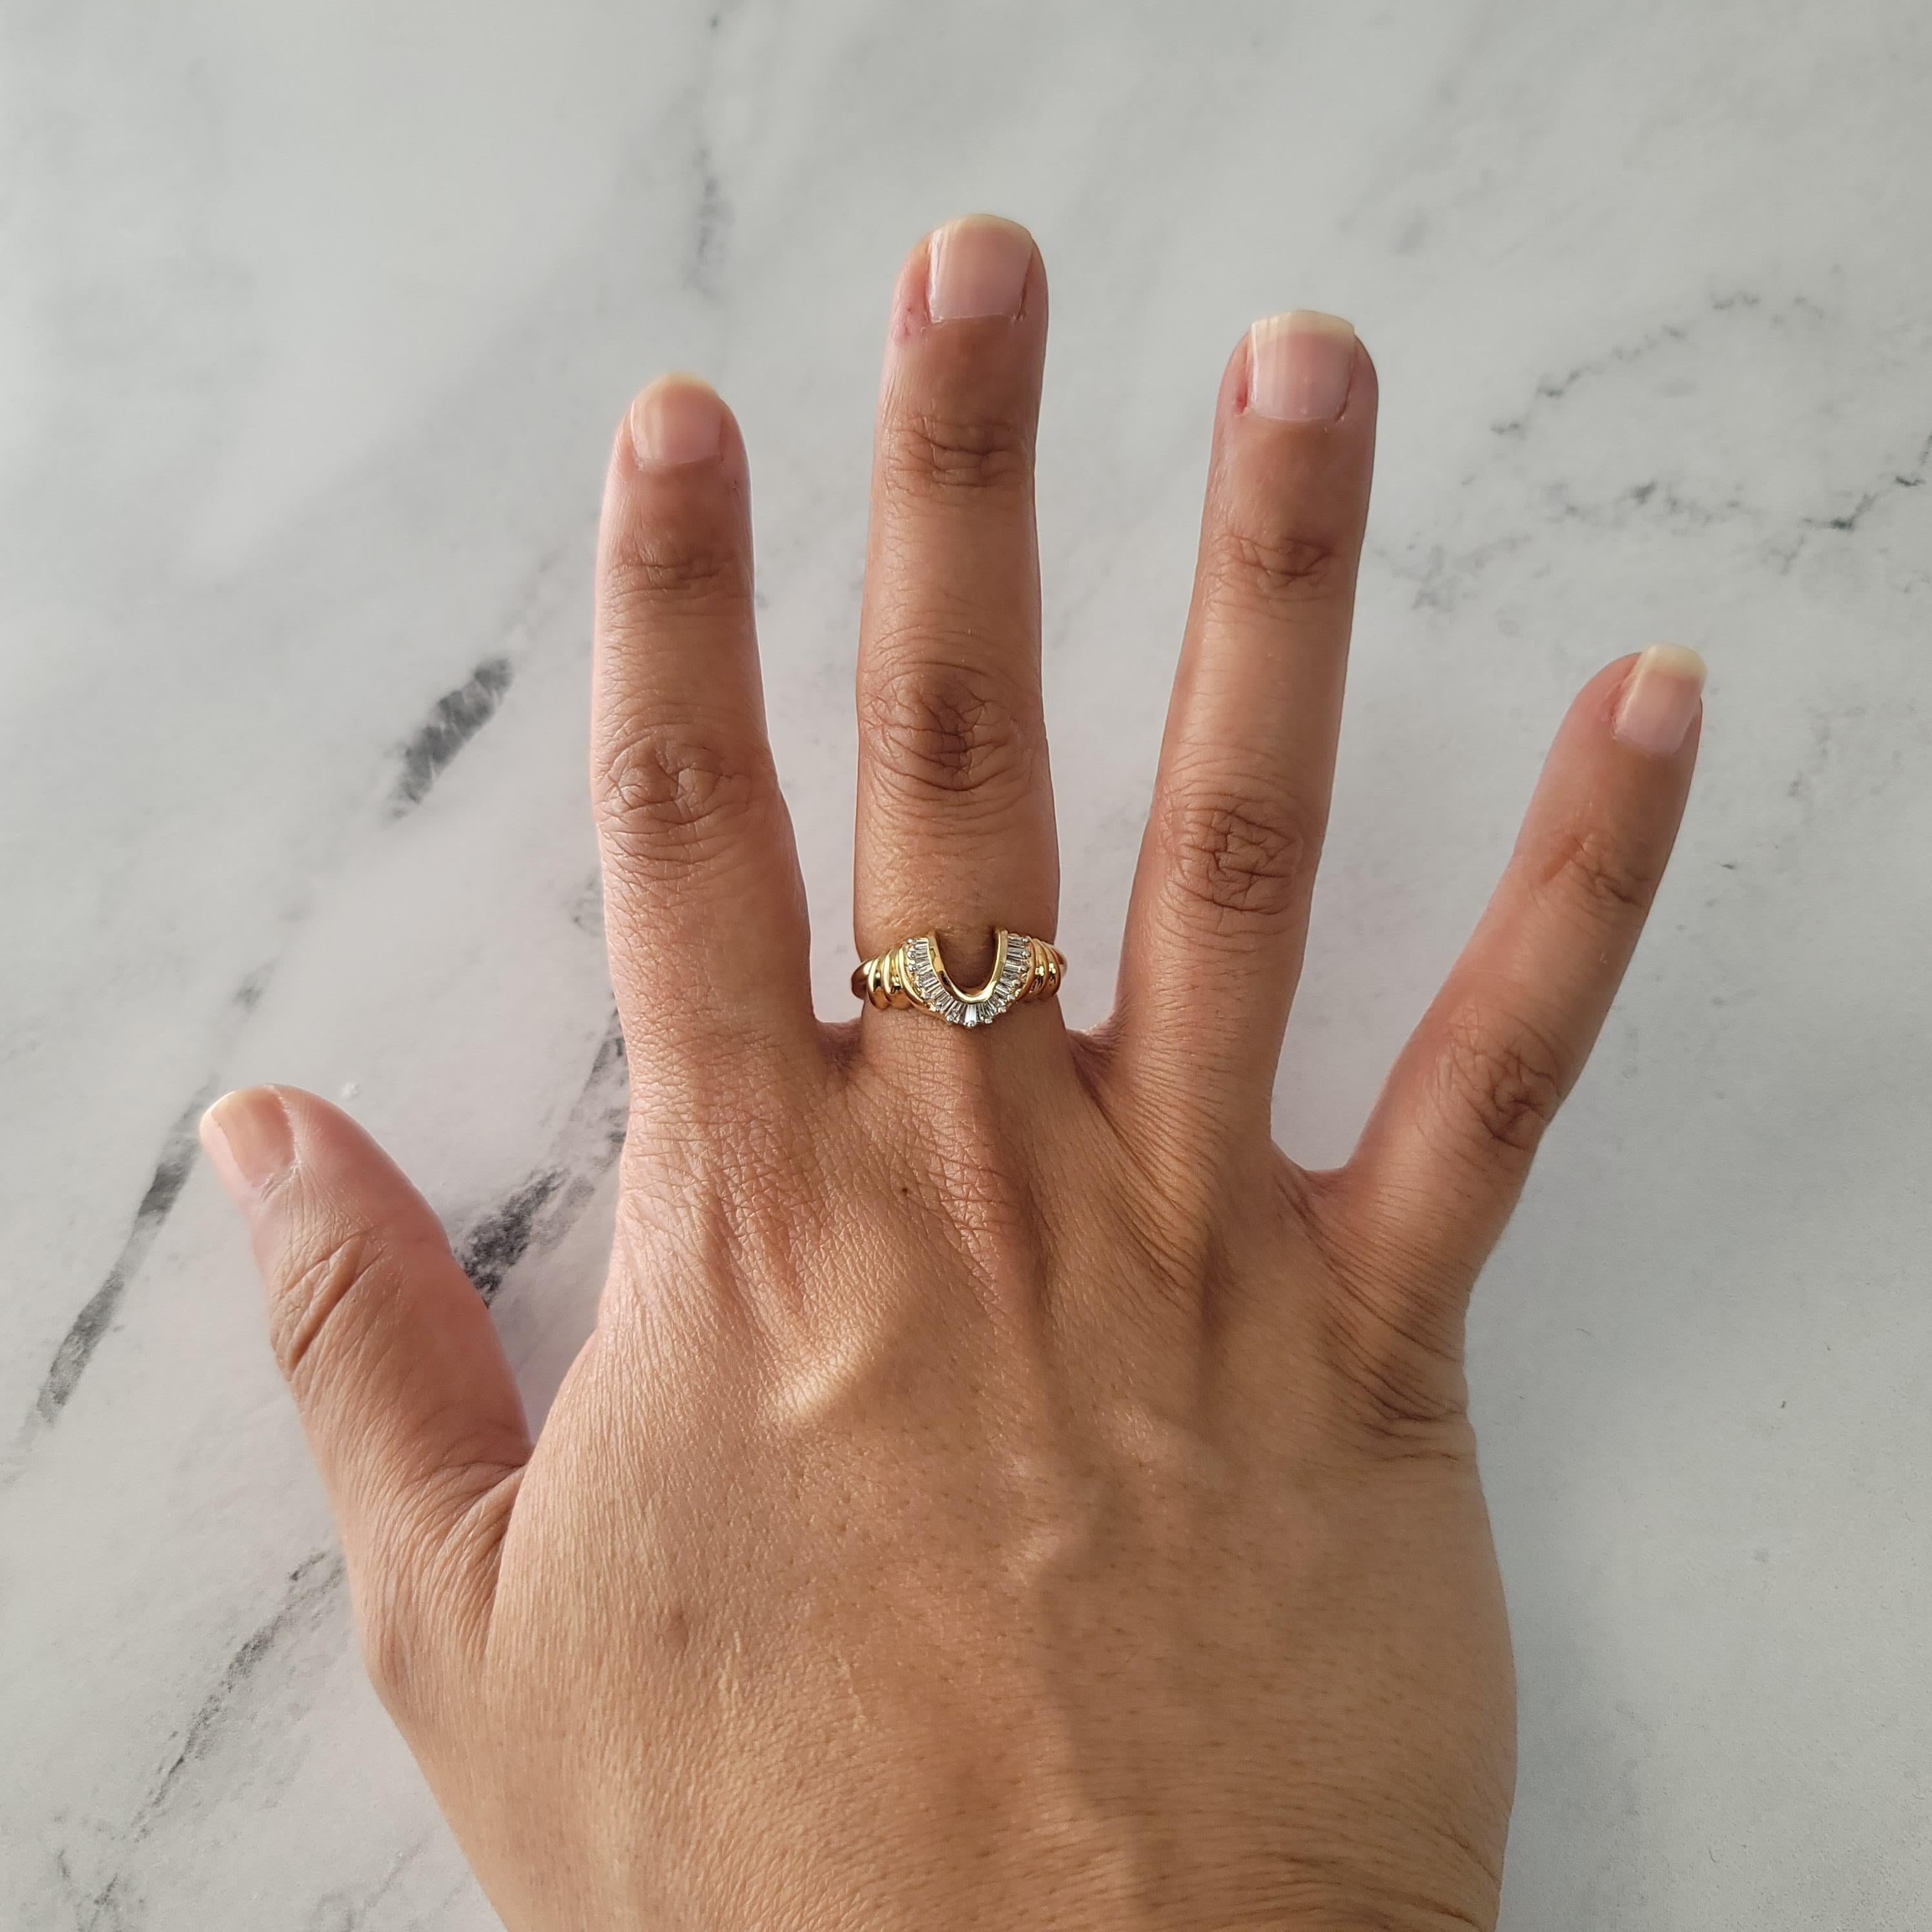 ♥ Ring Summary  ♥

Main Stone: Diamond
Approx. Carat Weight: .20cttw
Diamond Clarity: SI1
Diamond Color: G
Band Material: 14k Yellow Gold
Dimension Height: 10mm
Stone Cut: Baguette
**Ring Guard only